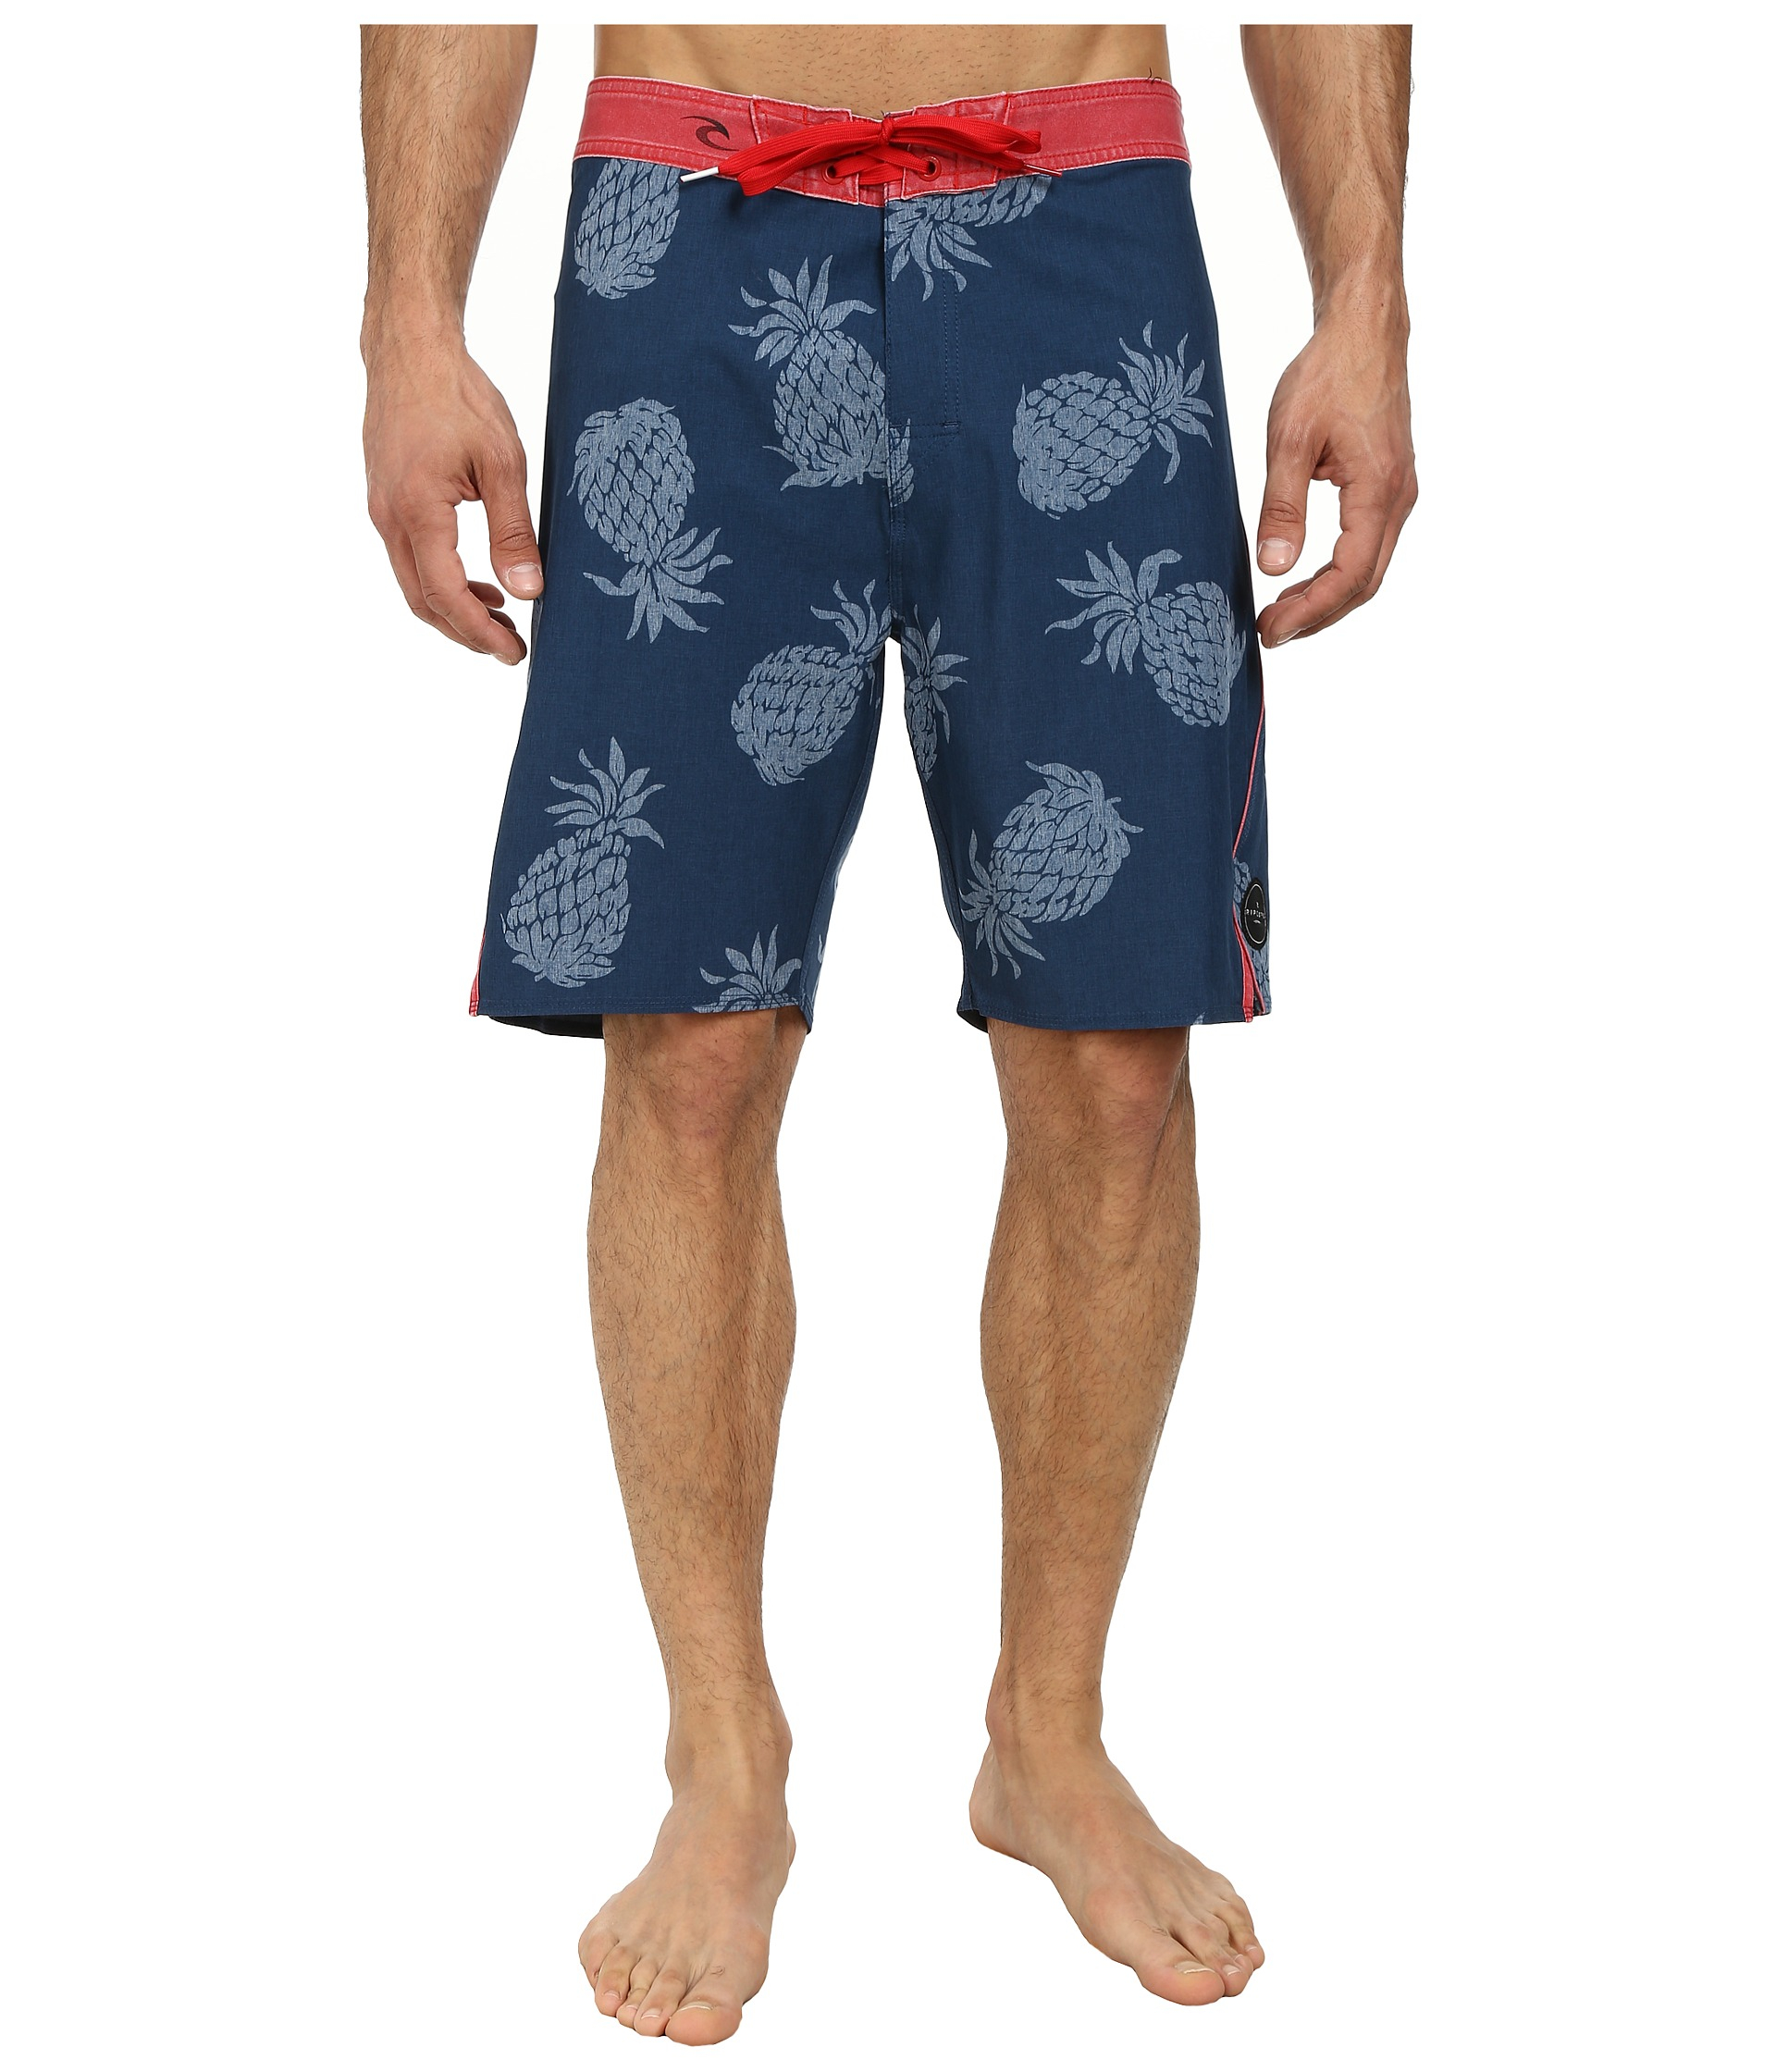 Lyst - Rip Curl Mirage Aggropineapples Boardshorts in Blue for Men